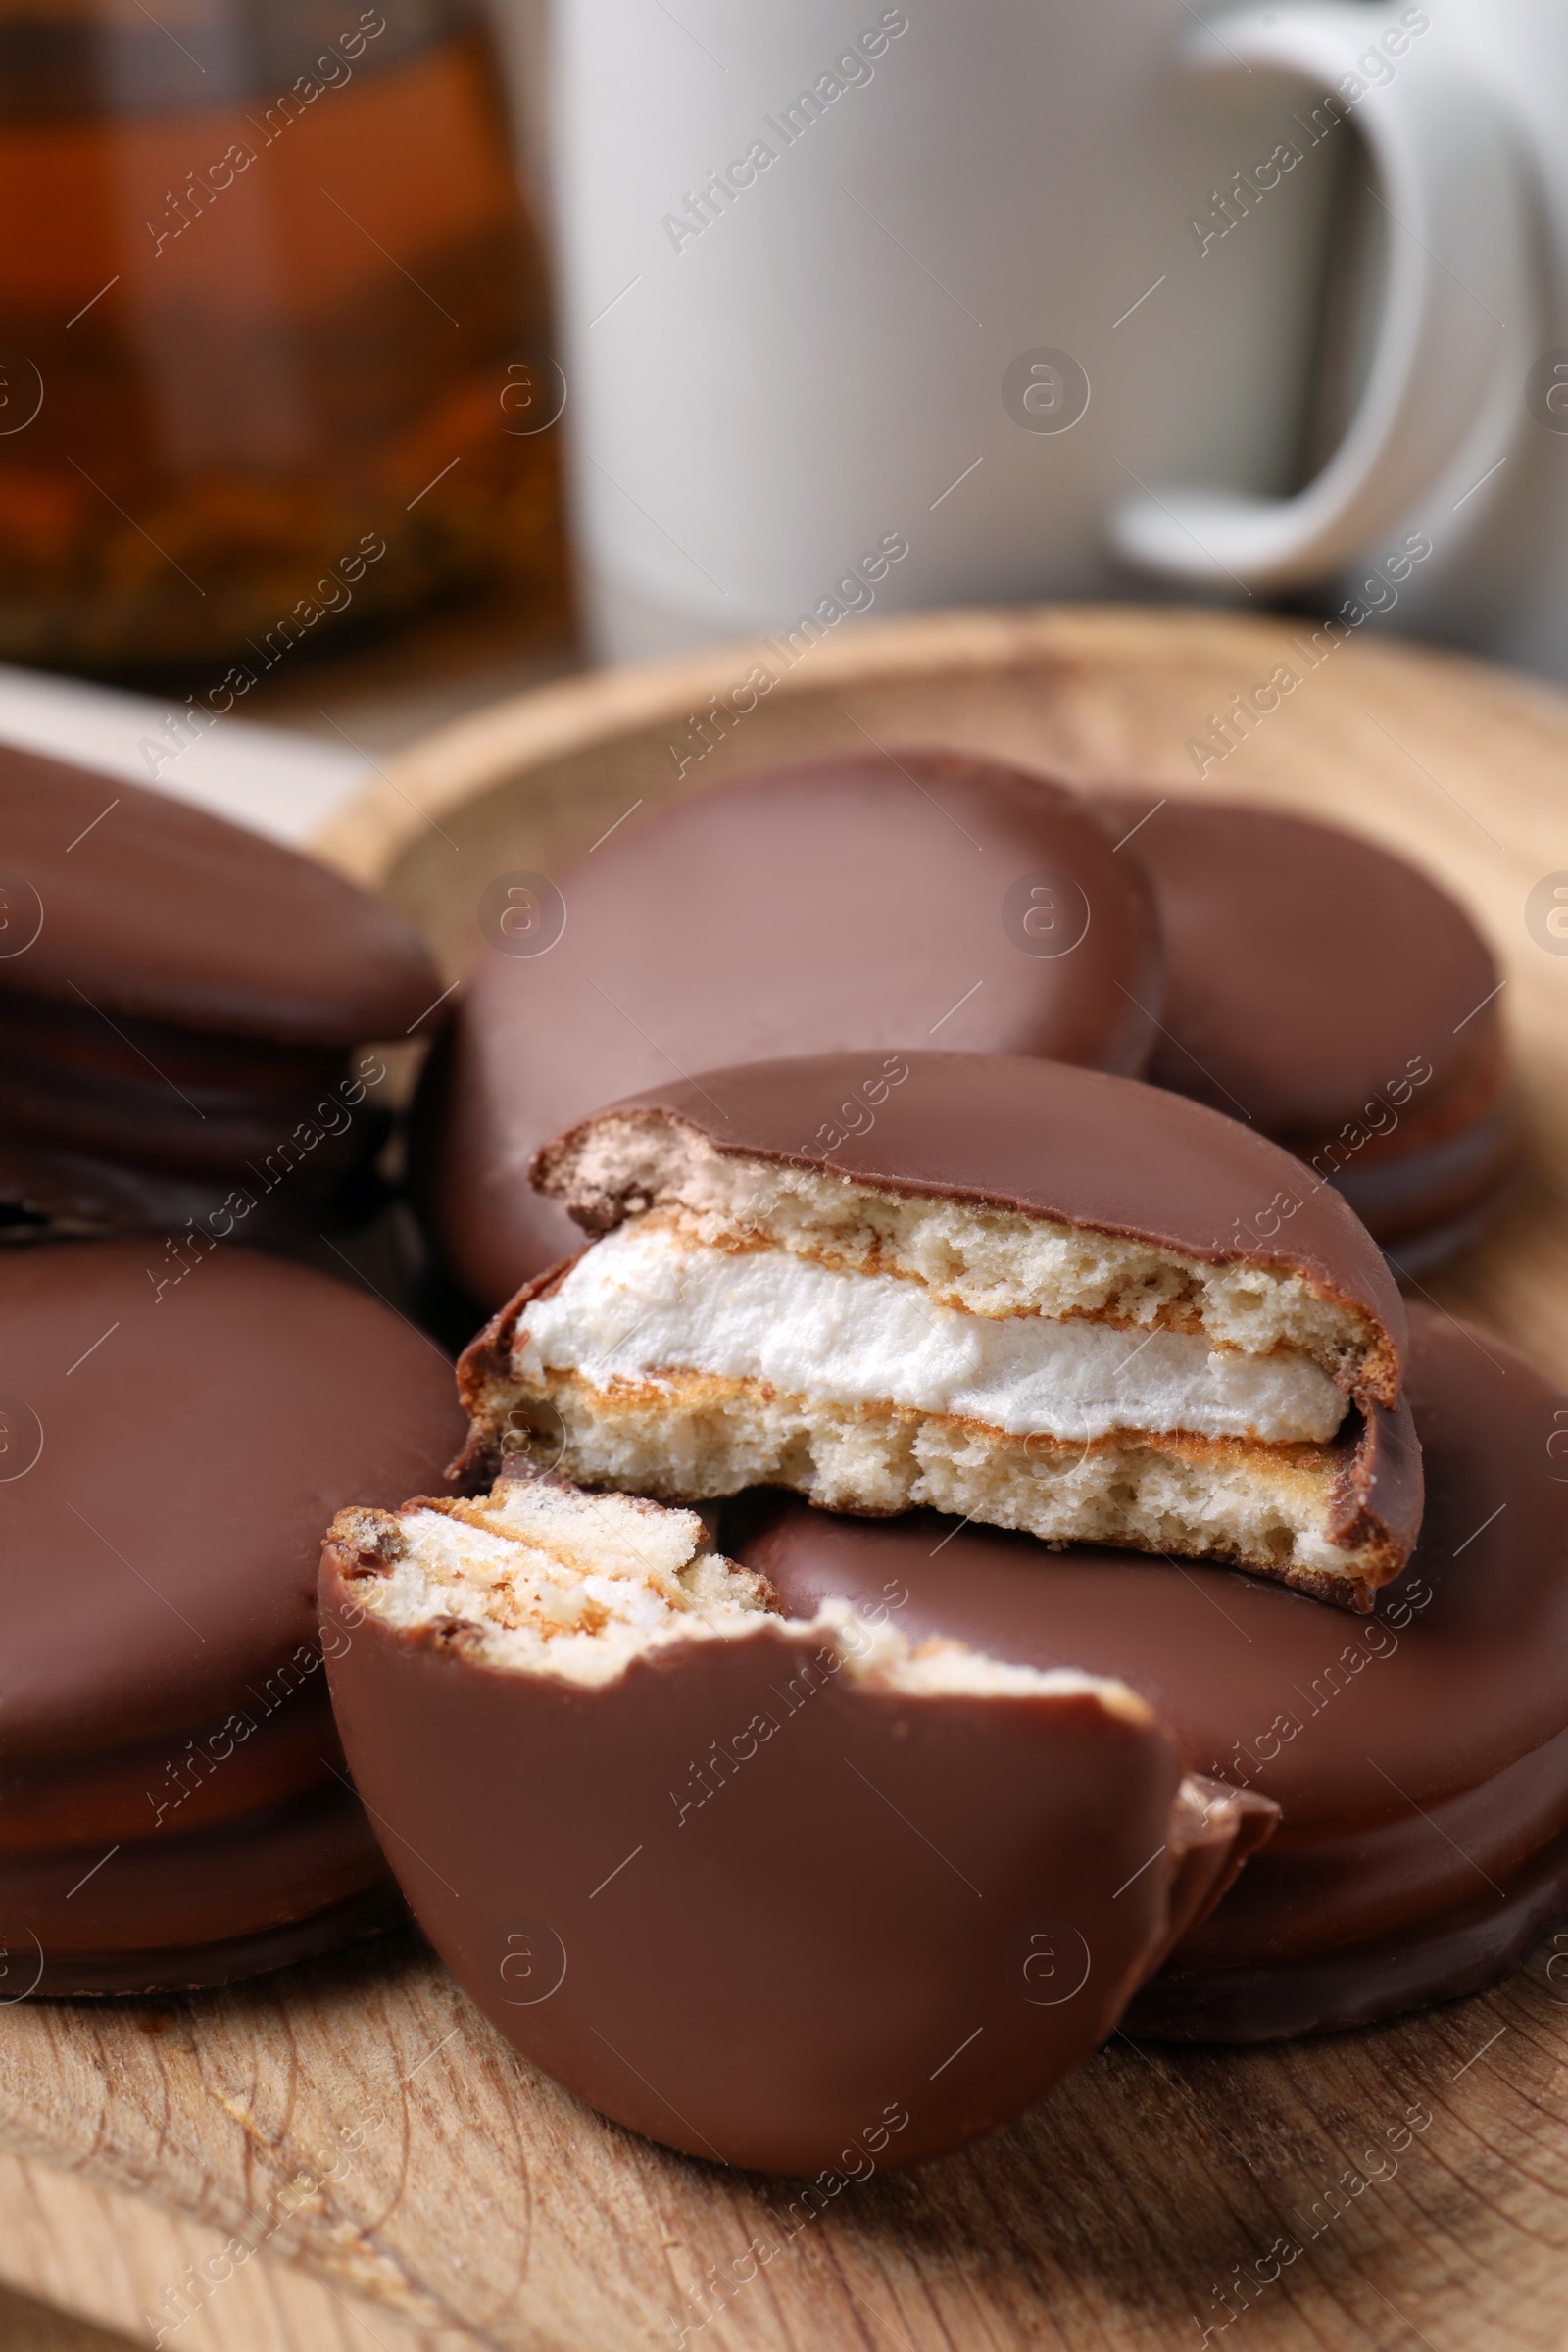 Photo of Tasty choco pies on wooden plate, closeup view